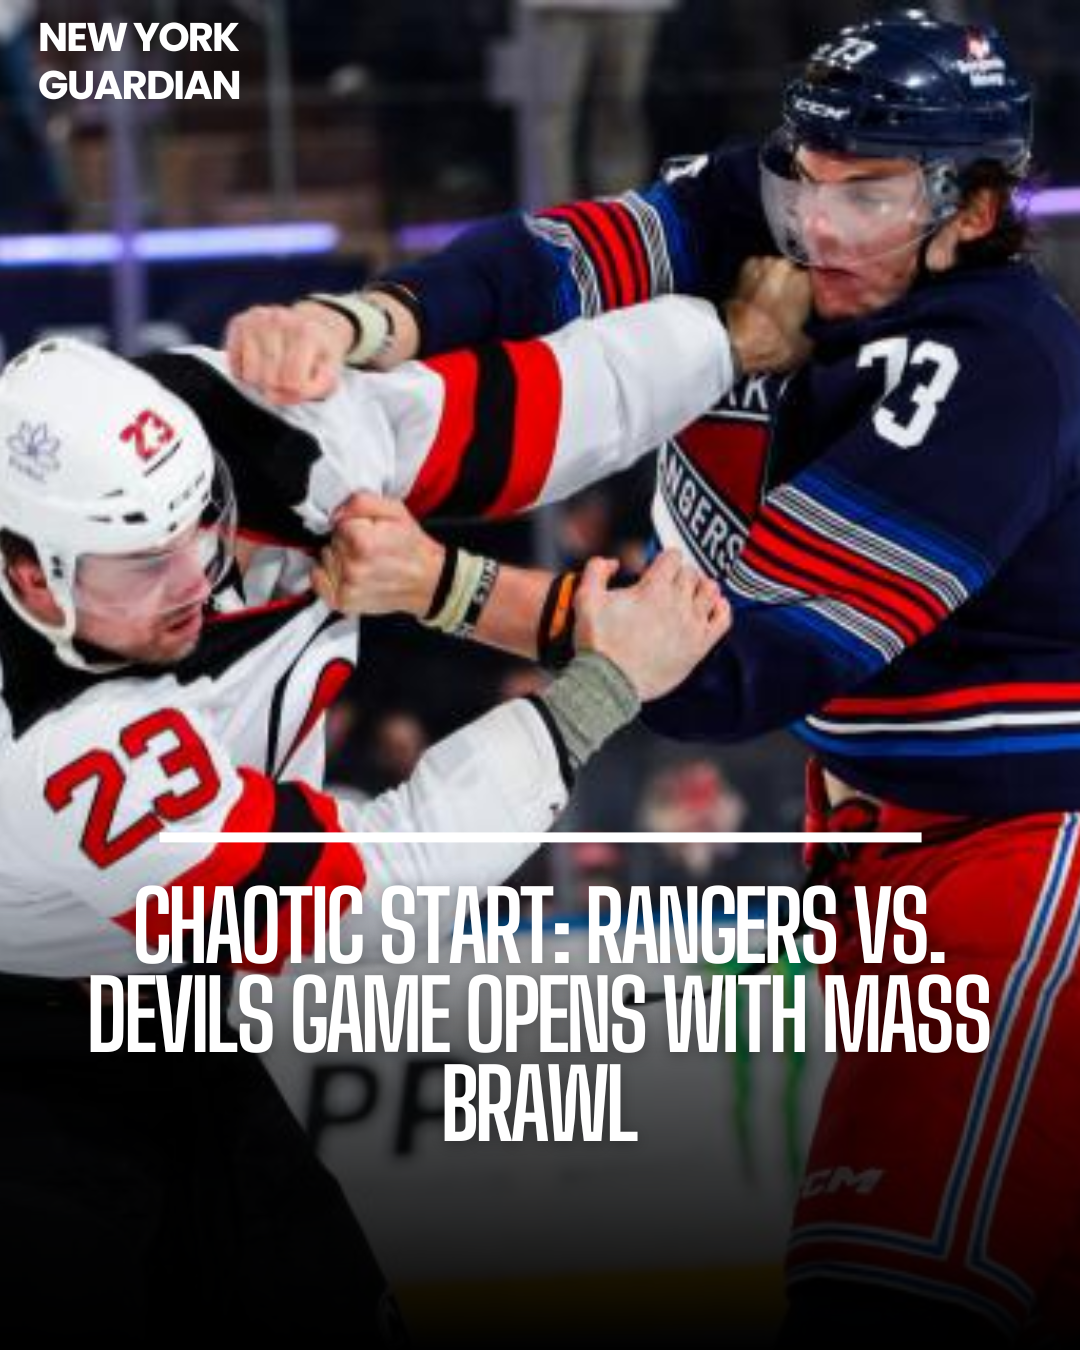 The New York Rangers and New Jersey Devils set a violent tone for Wednesday night's game with a big brawl